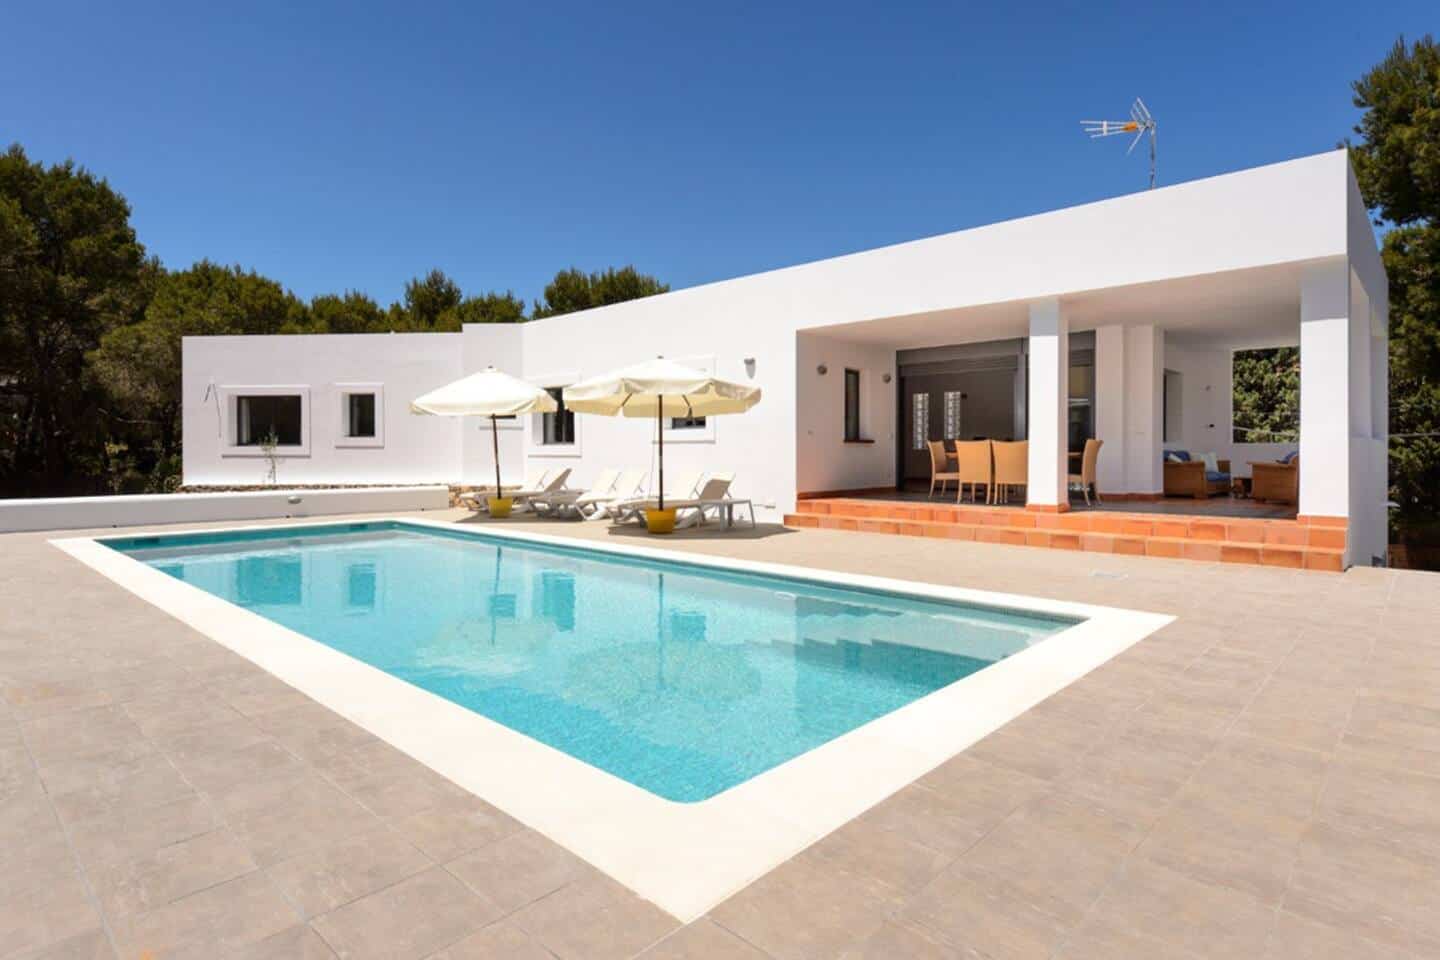 Image of Airbnb rental in Ibiza, Spain